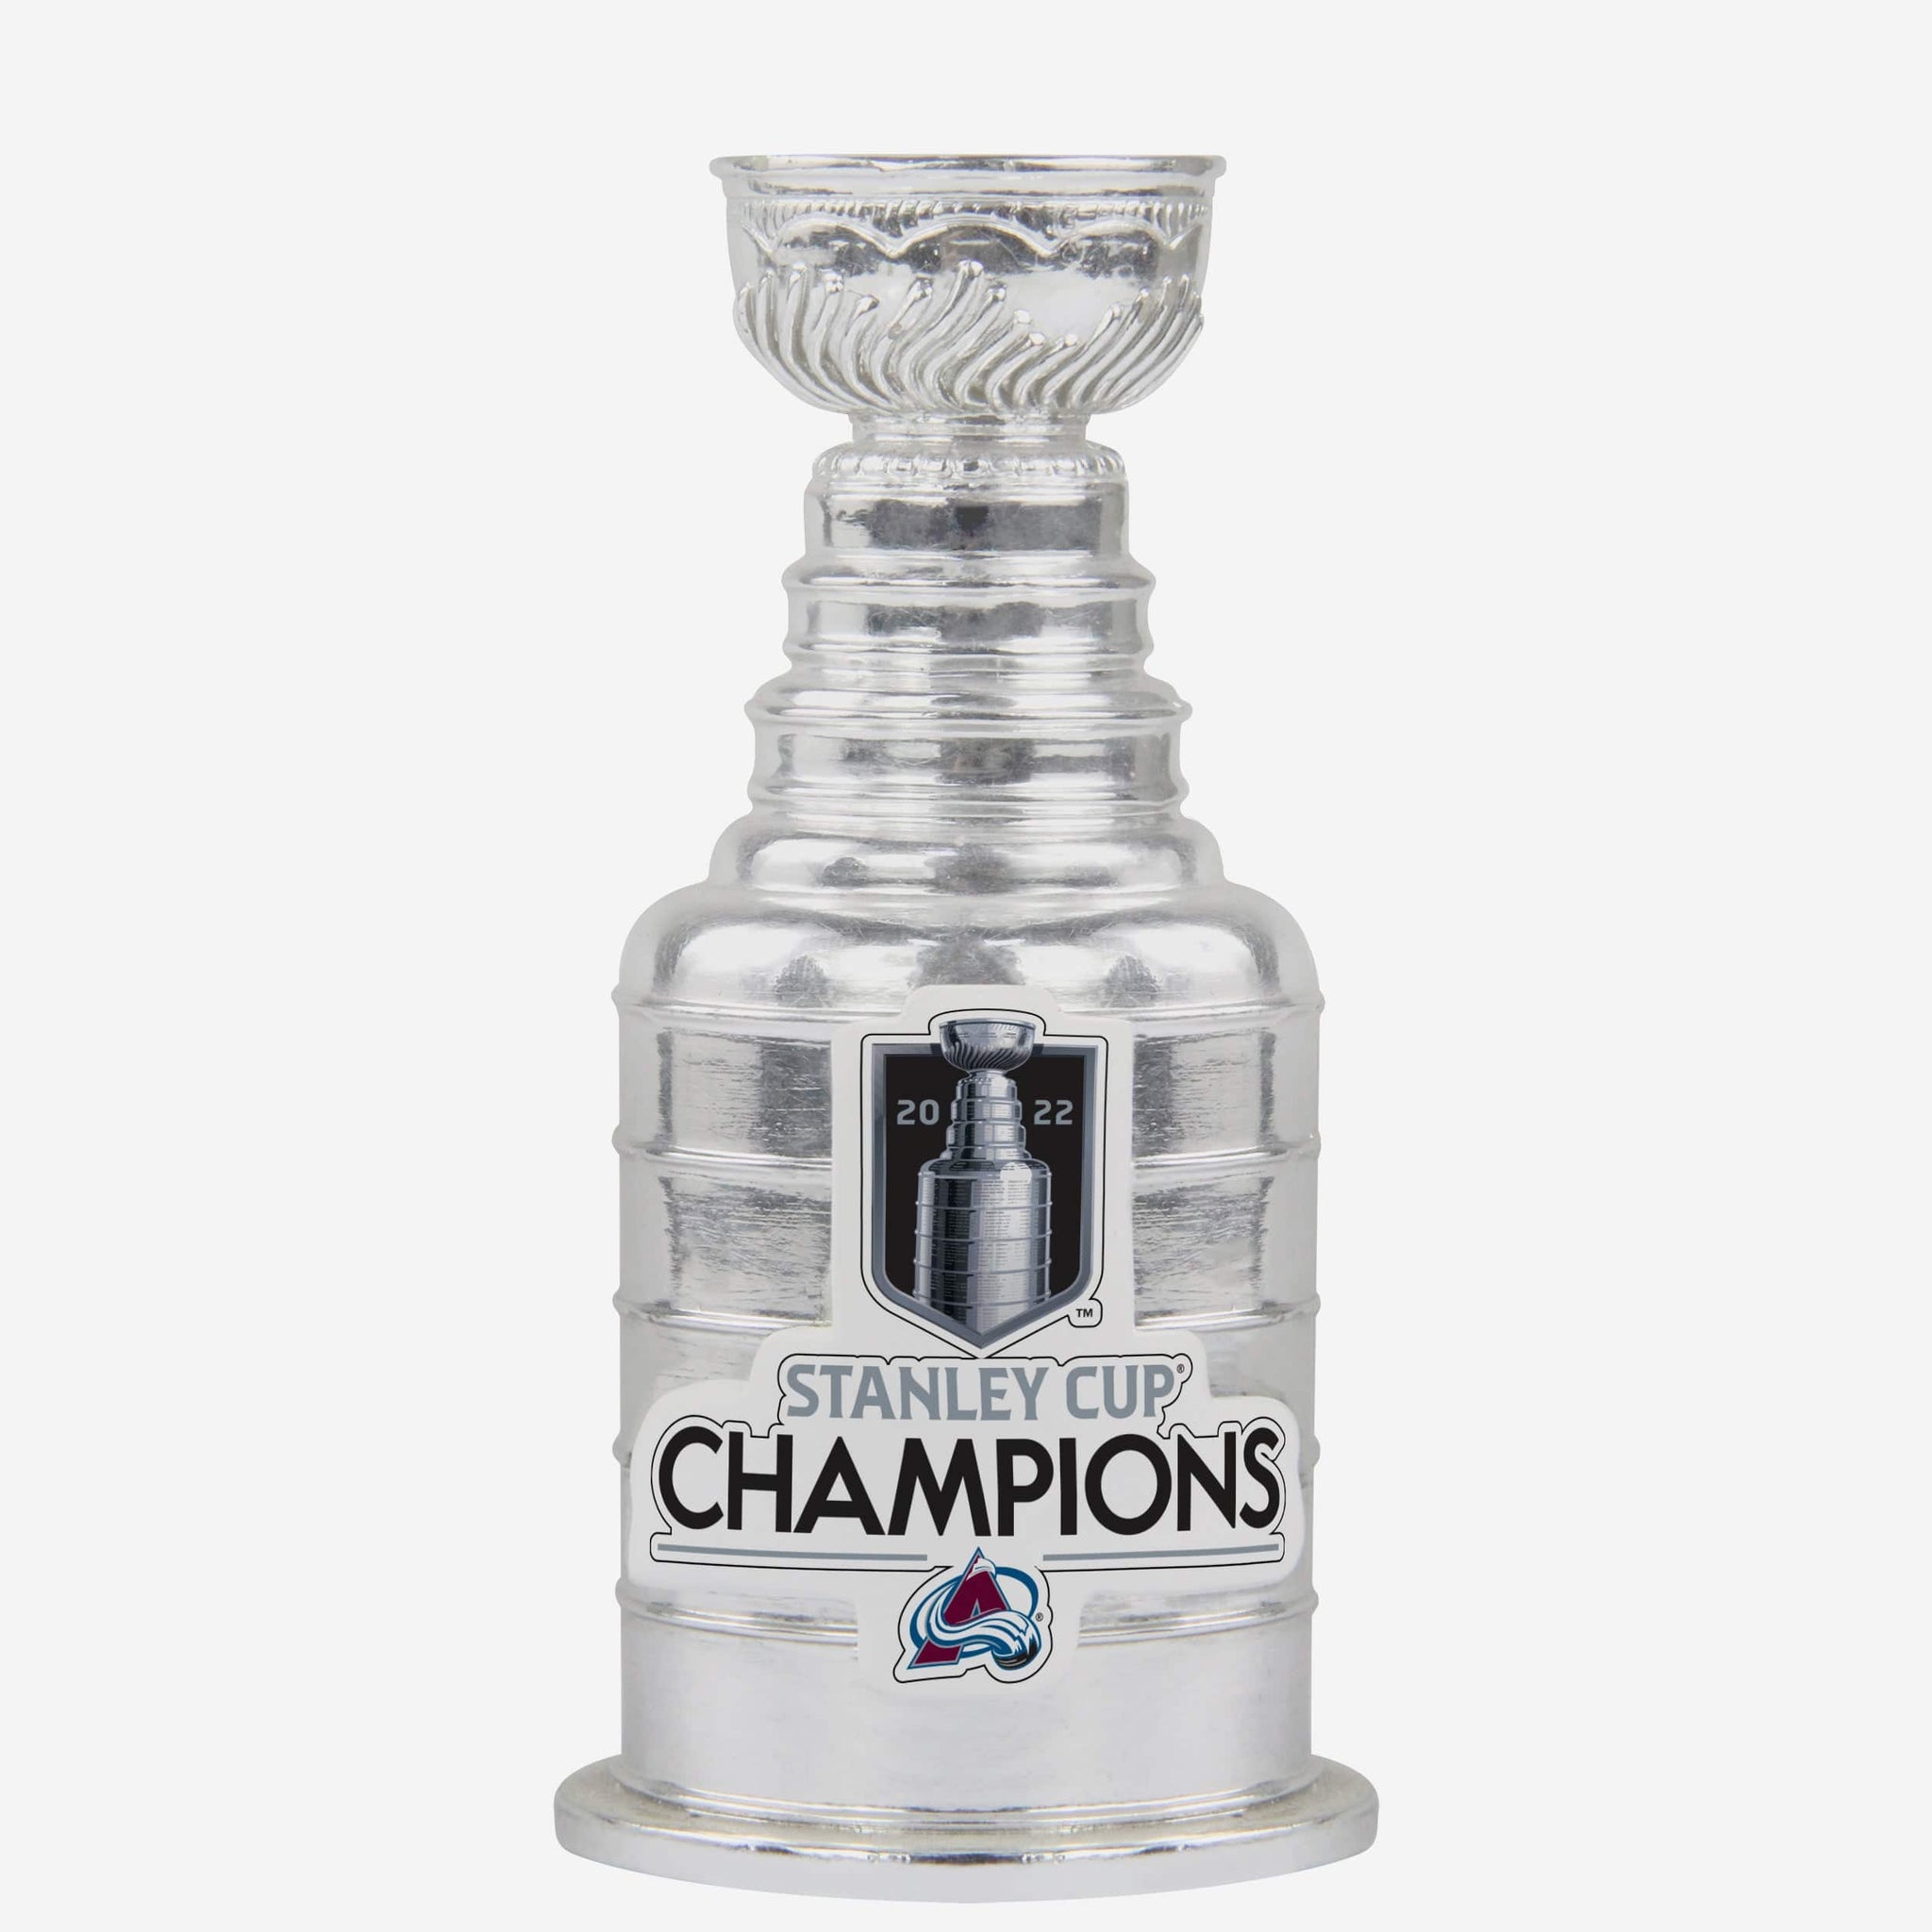 Has anyone seen a mug like this one for our Stanley Cup this year? Can't  find anything on the nhl shop like this : r/ColoradoAvalanche